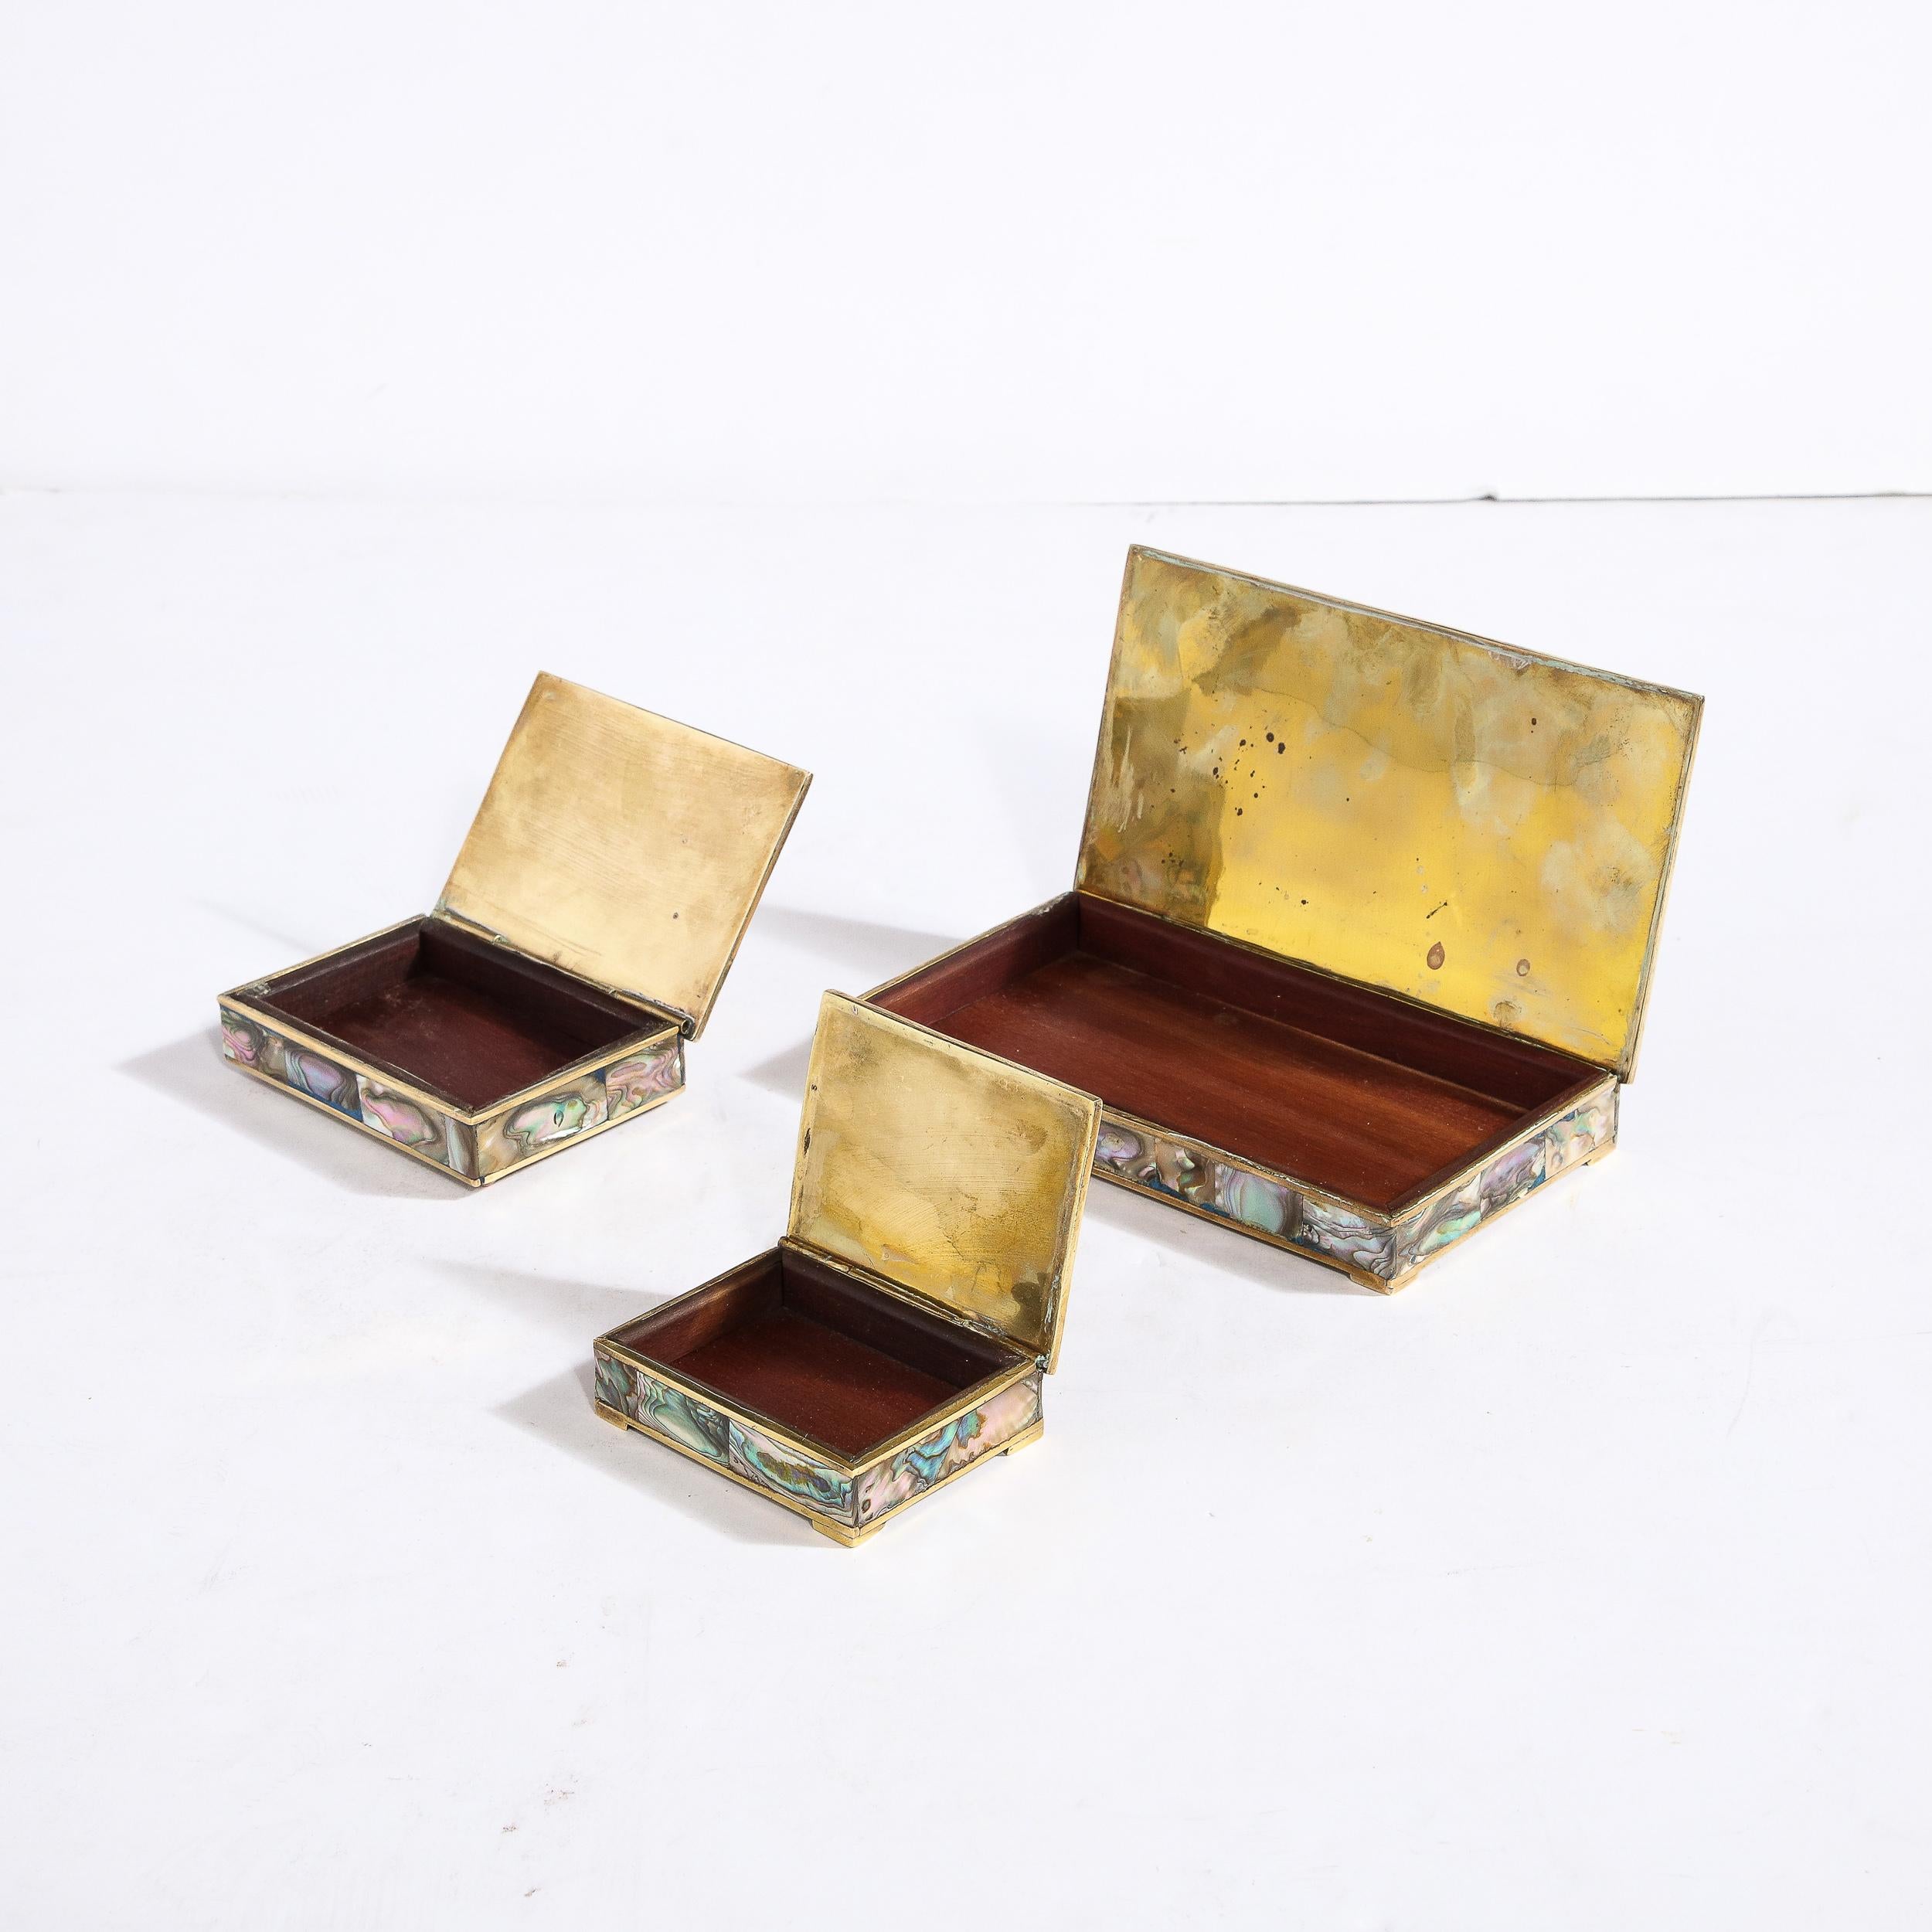 This striking set of Mid-Century Modern trinket boxes were realized in the Philippines circa 1960. They feature abalone clad exteriors showing the inherent beauty of the shell- with its organic texture and iridescent skein with an abundance of muted